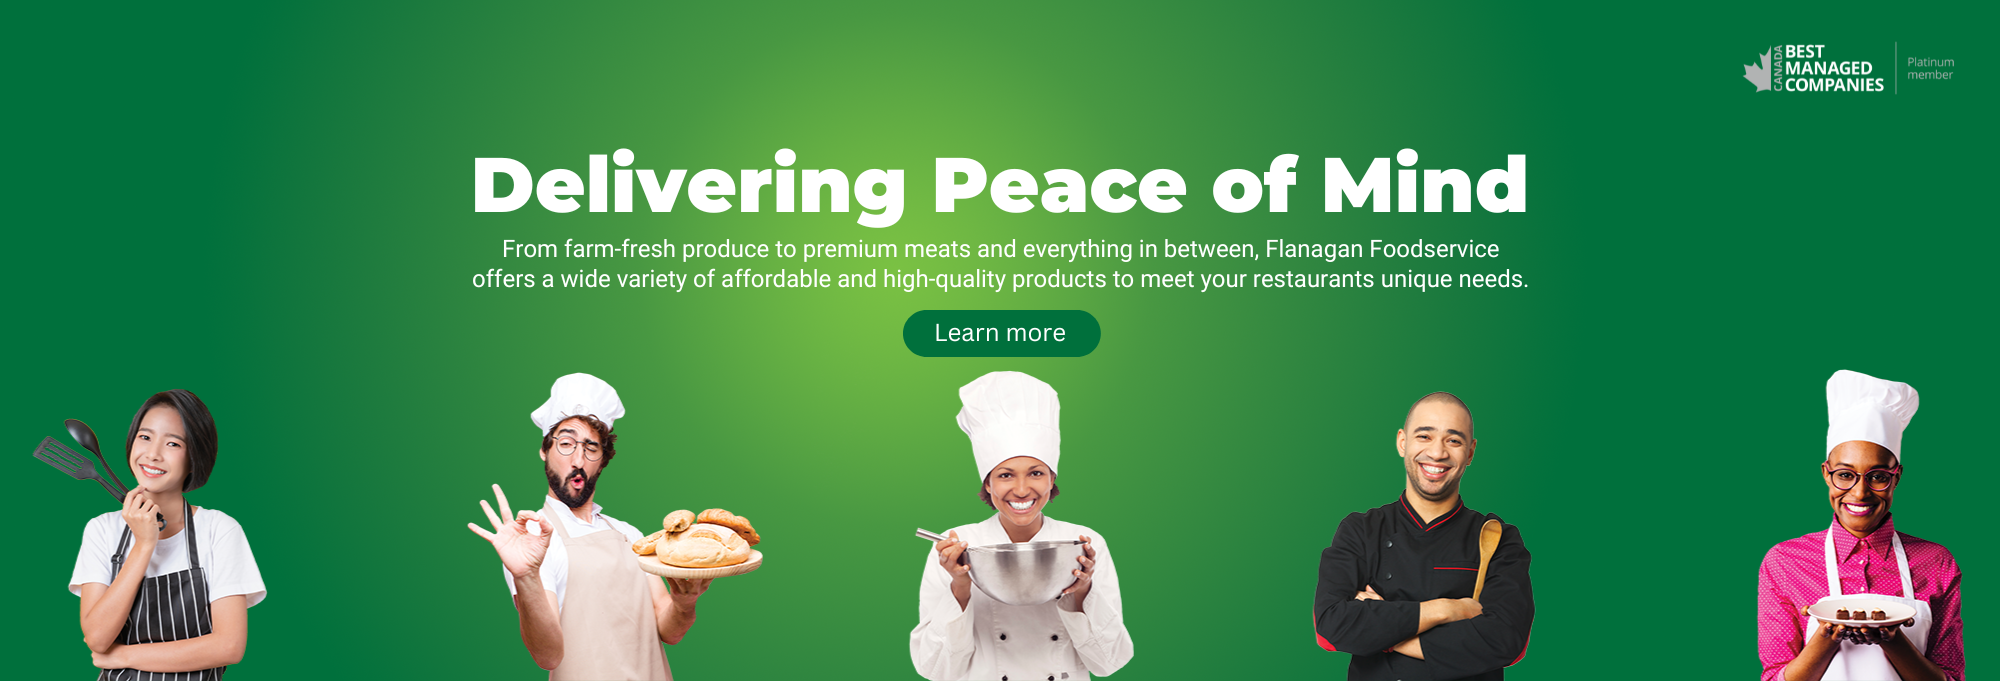 Variety of Chefs and cooks, Flanagan Foodservice Delivers Peace of Mind